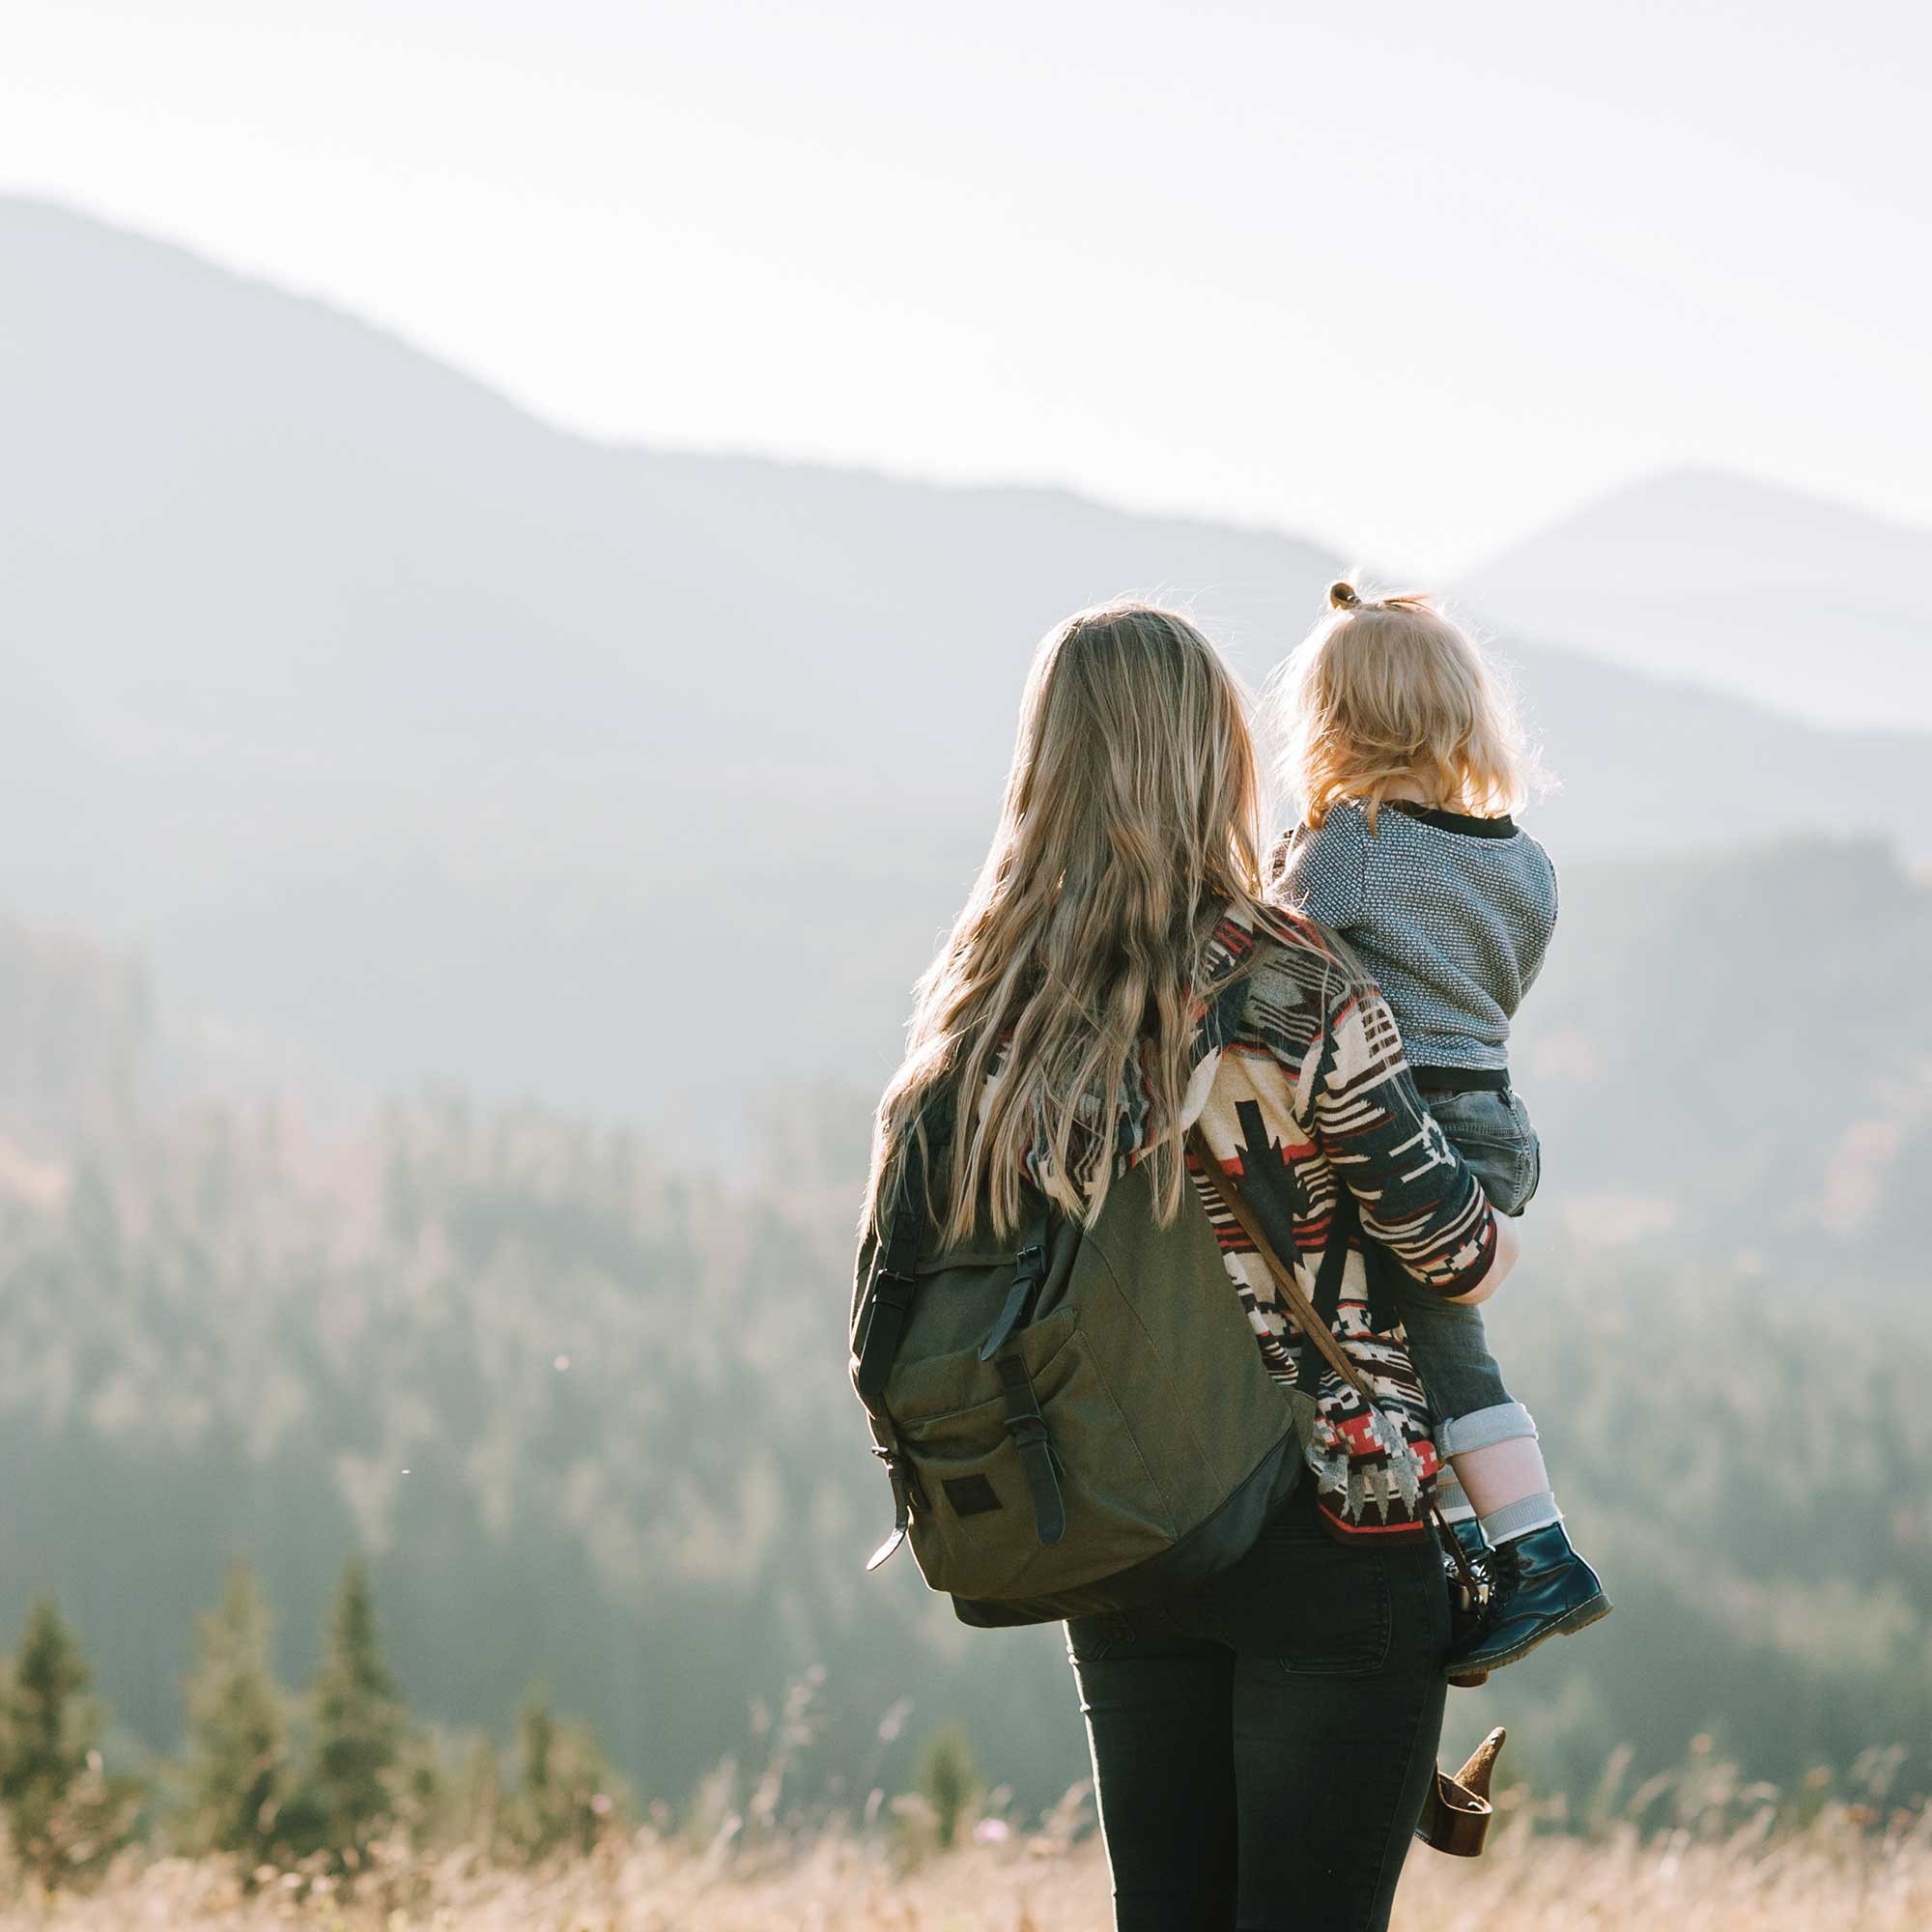 Woman with backpack on holding small child looking at the mountains